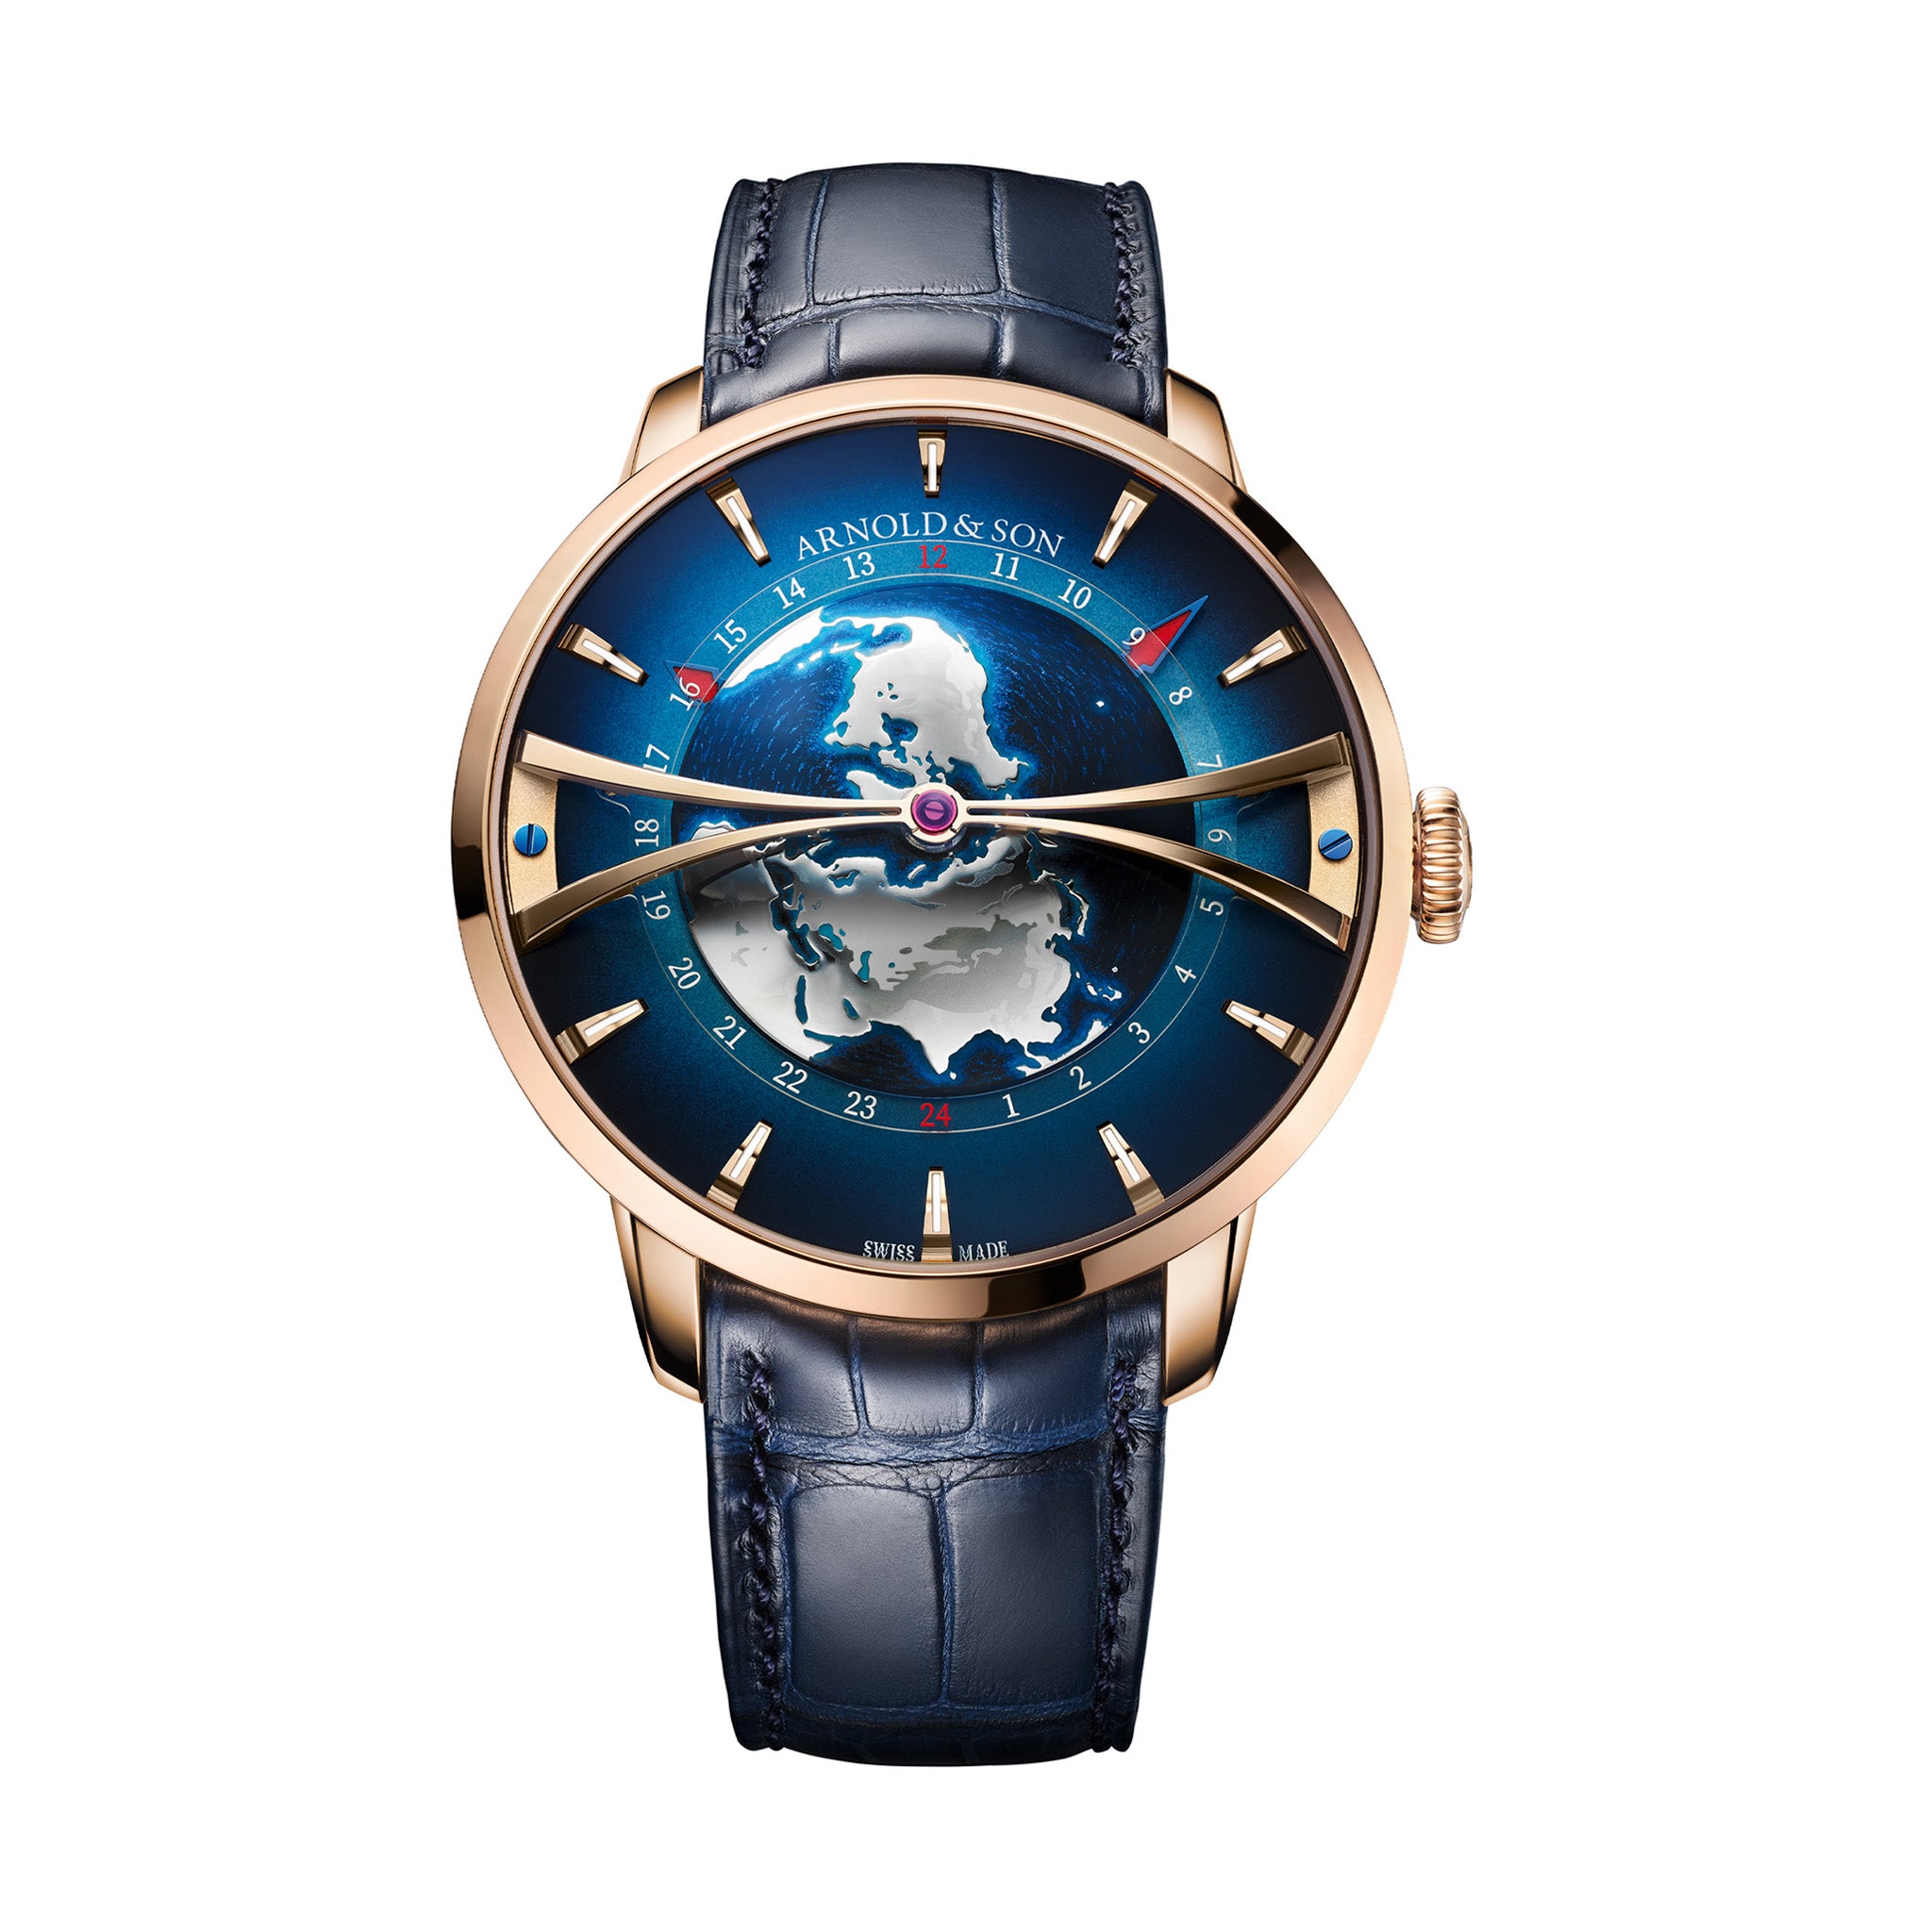 Arnold & Son - Globetrotter Platinum | Time and Watches | The watch blog